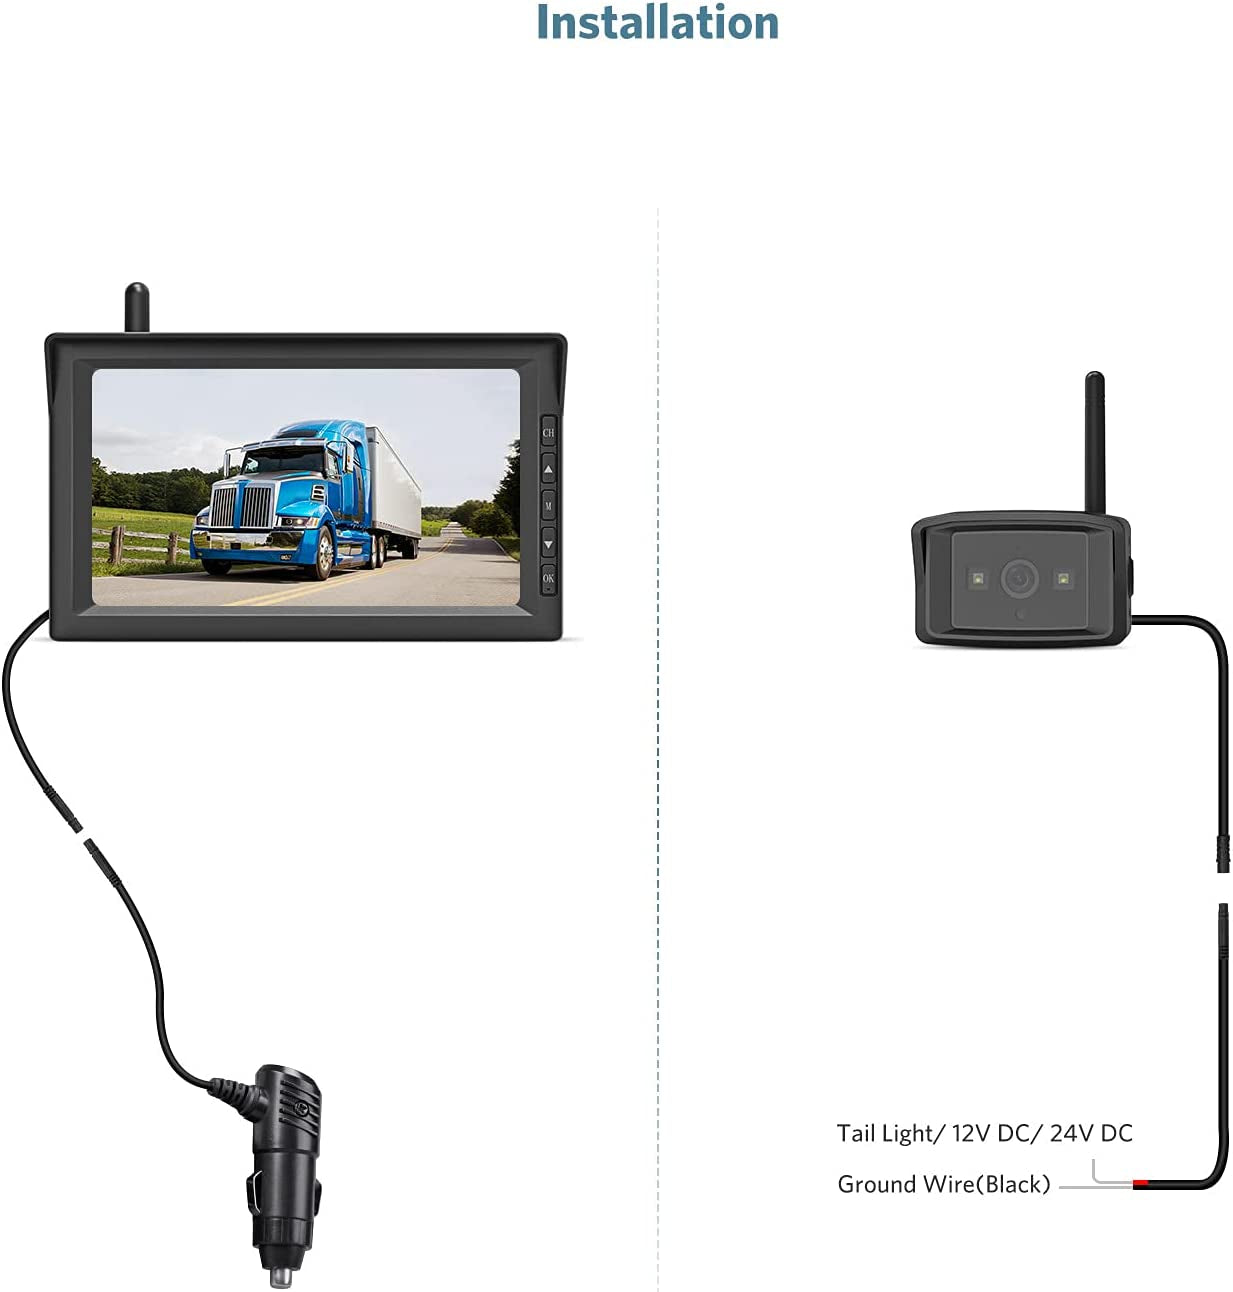 Wireless Backup Camera for RV Truck Car Trailer Pickup Van, with 7" HD Monitor Split Screen, IR Night Vision Waterproof Back up Camera Systems, Support 2 Cameras (BOSCAM K10)